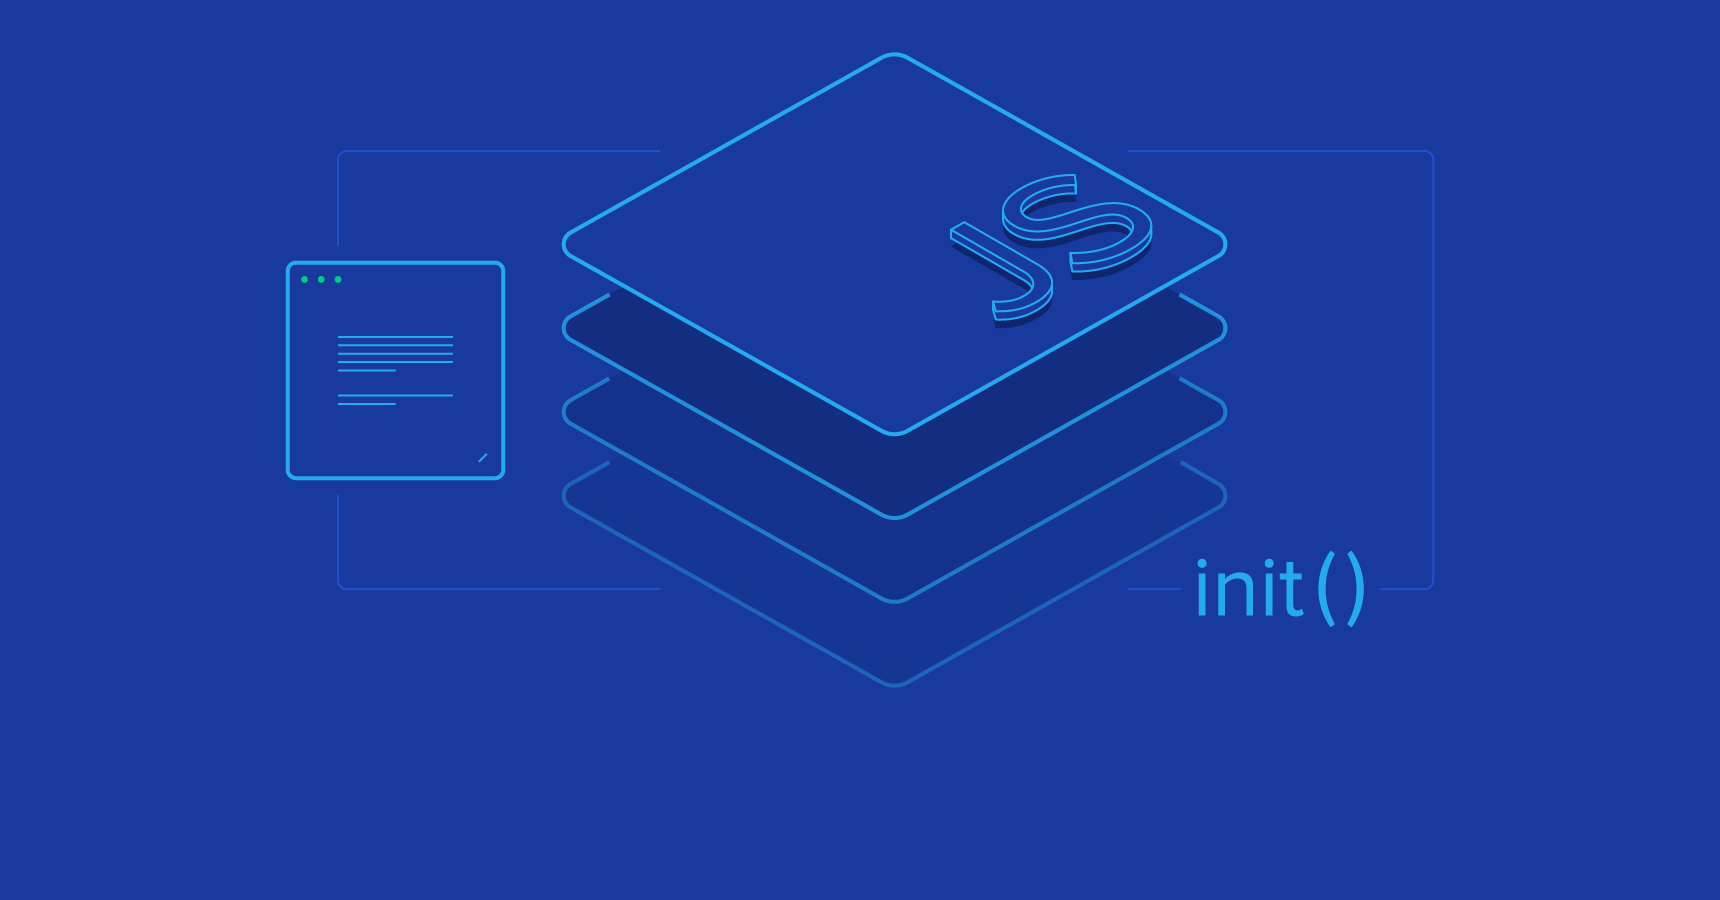 Init.js: A Guide to the Why and How of Full-Stack JavaScript